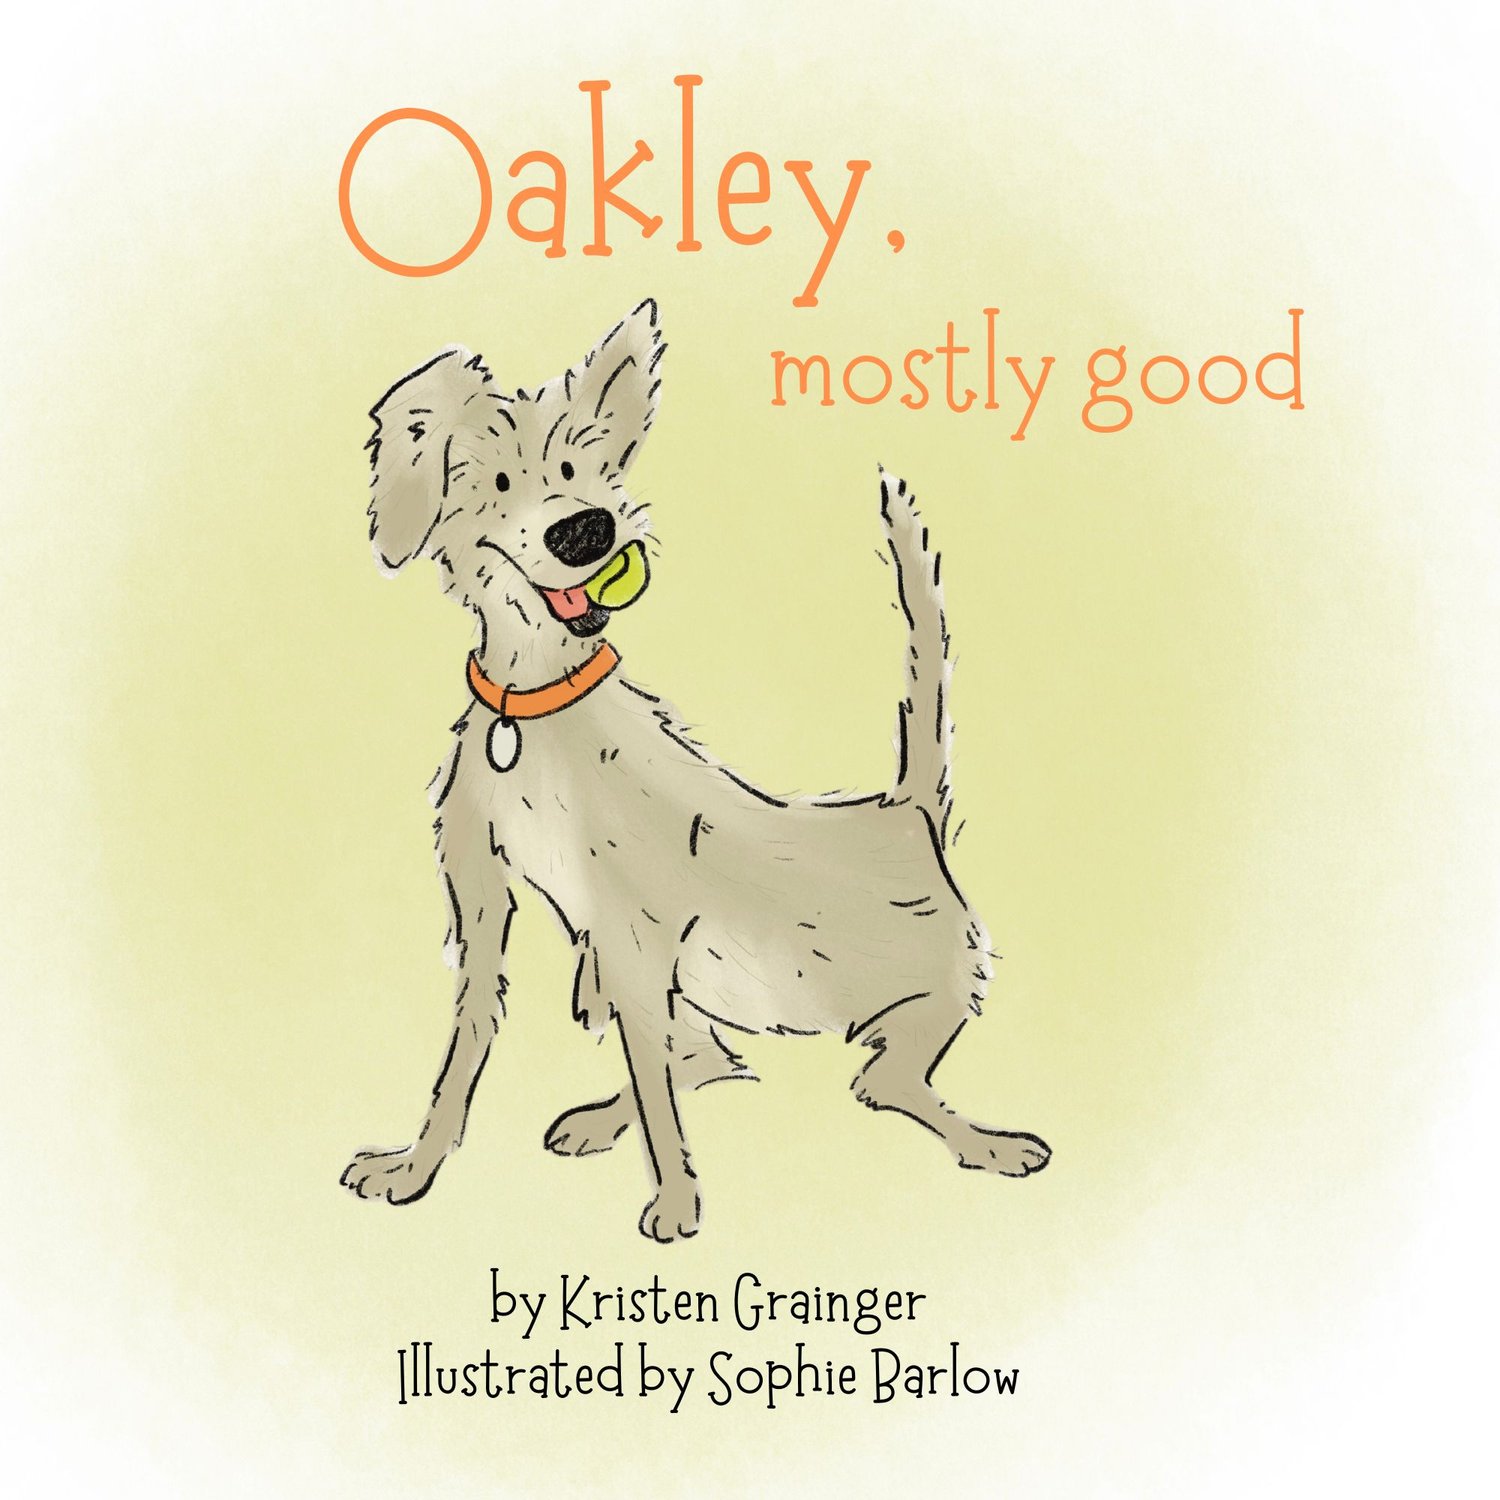 The front cover of Oakley, Mostly Good by Kristen Grainger